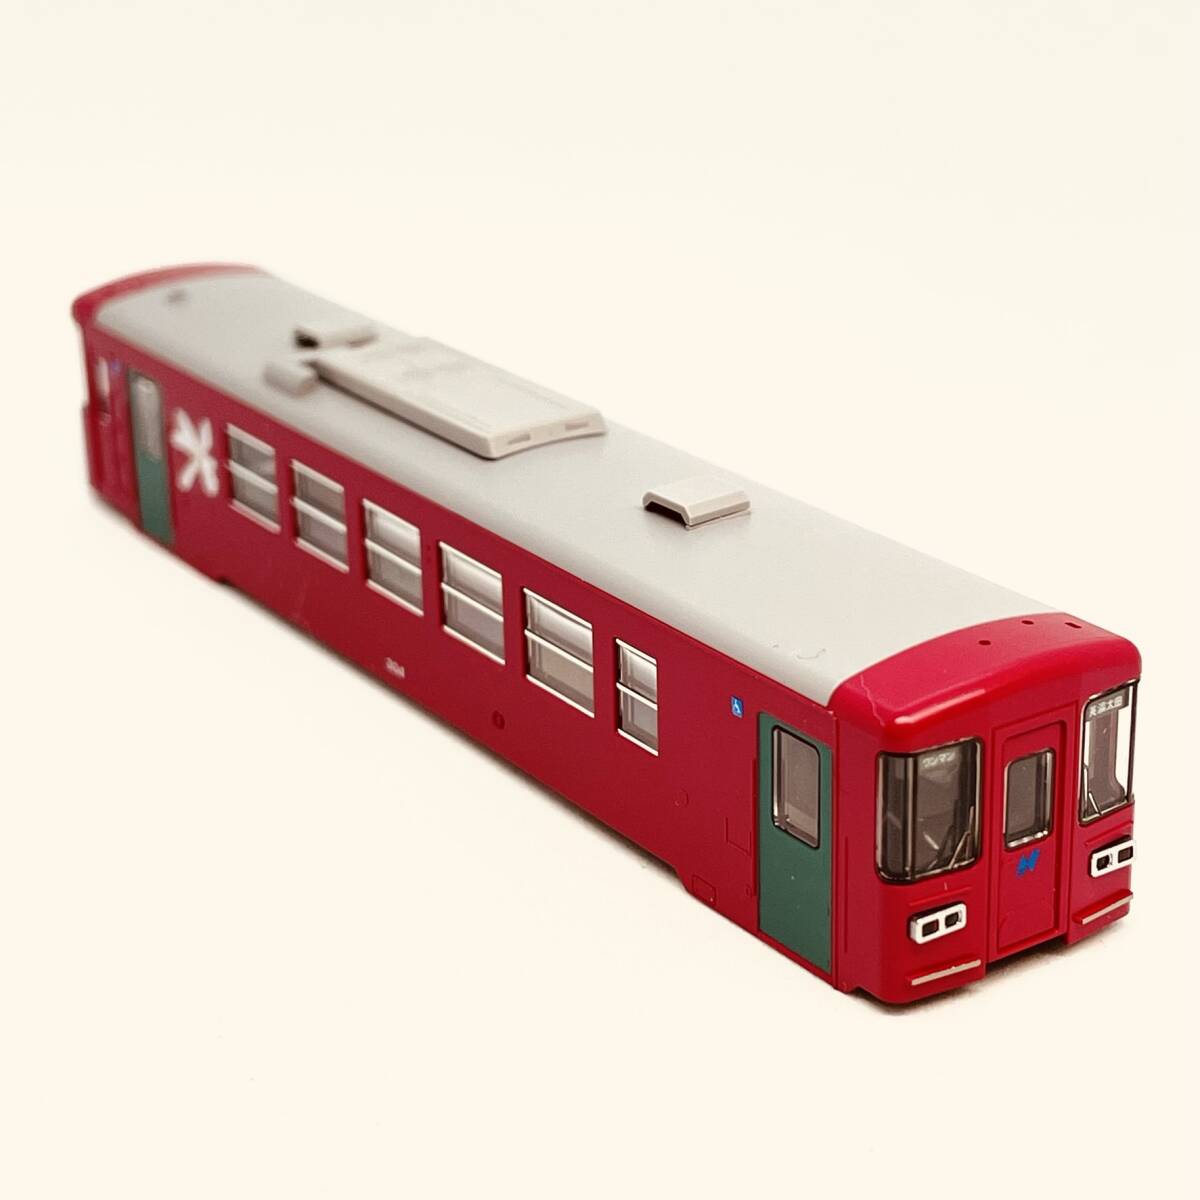 TOMIXnagala304 roof + body + glass + light shade case 1 both minute entering 8614 length good river railroad nagala300 shape (304 number ) from rose si